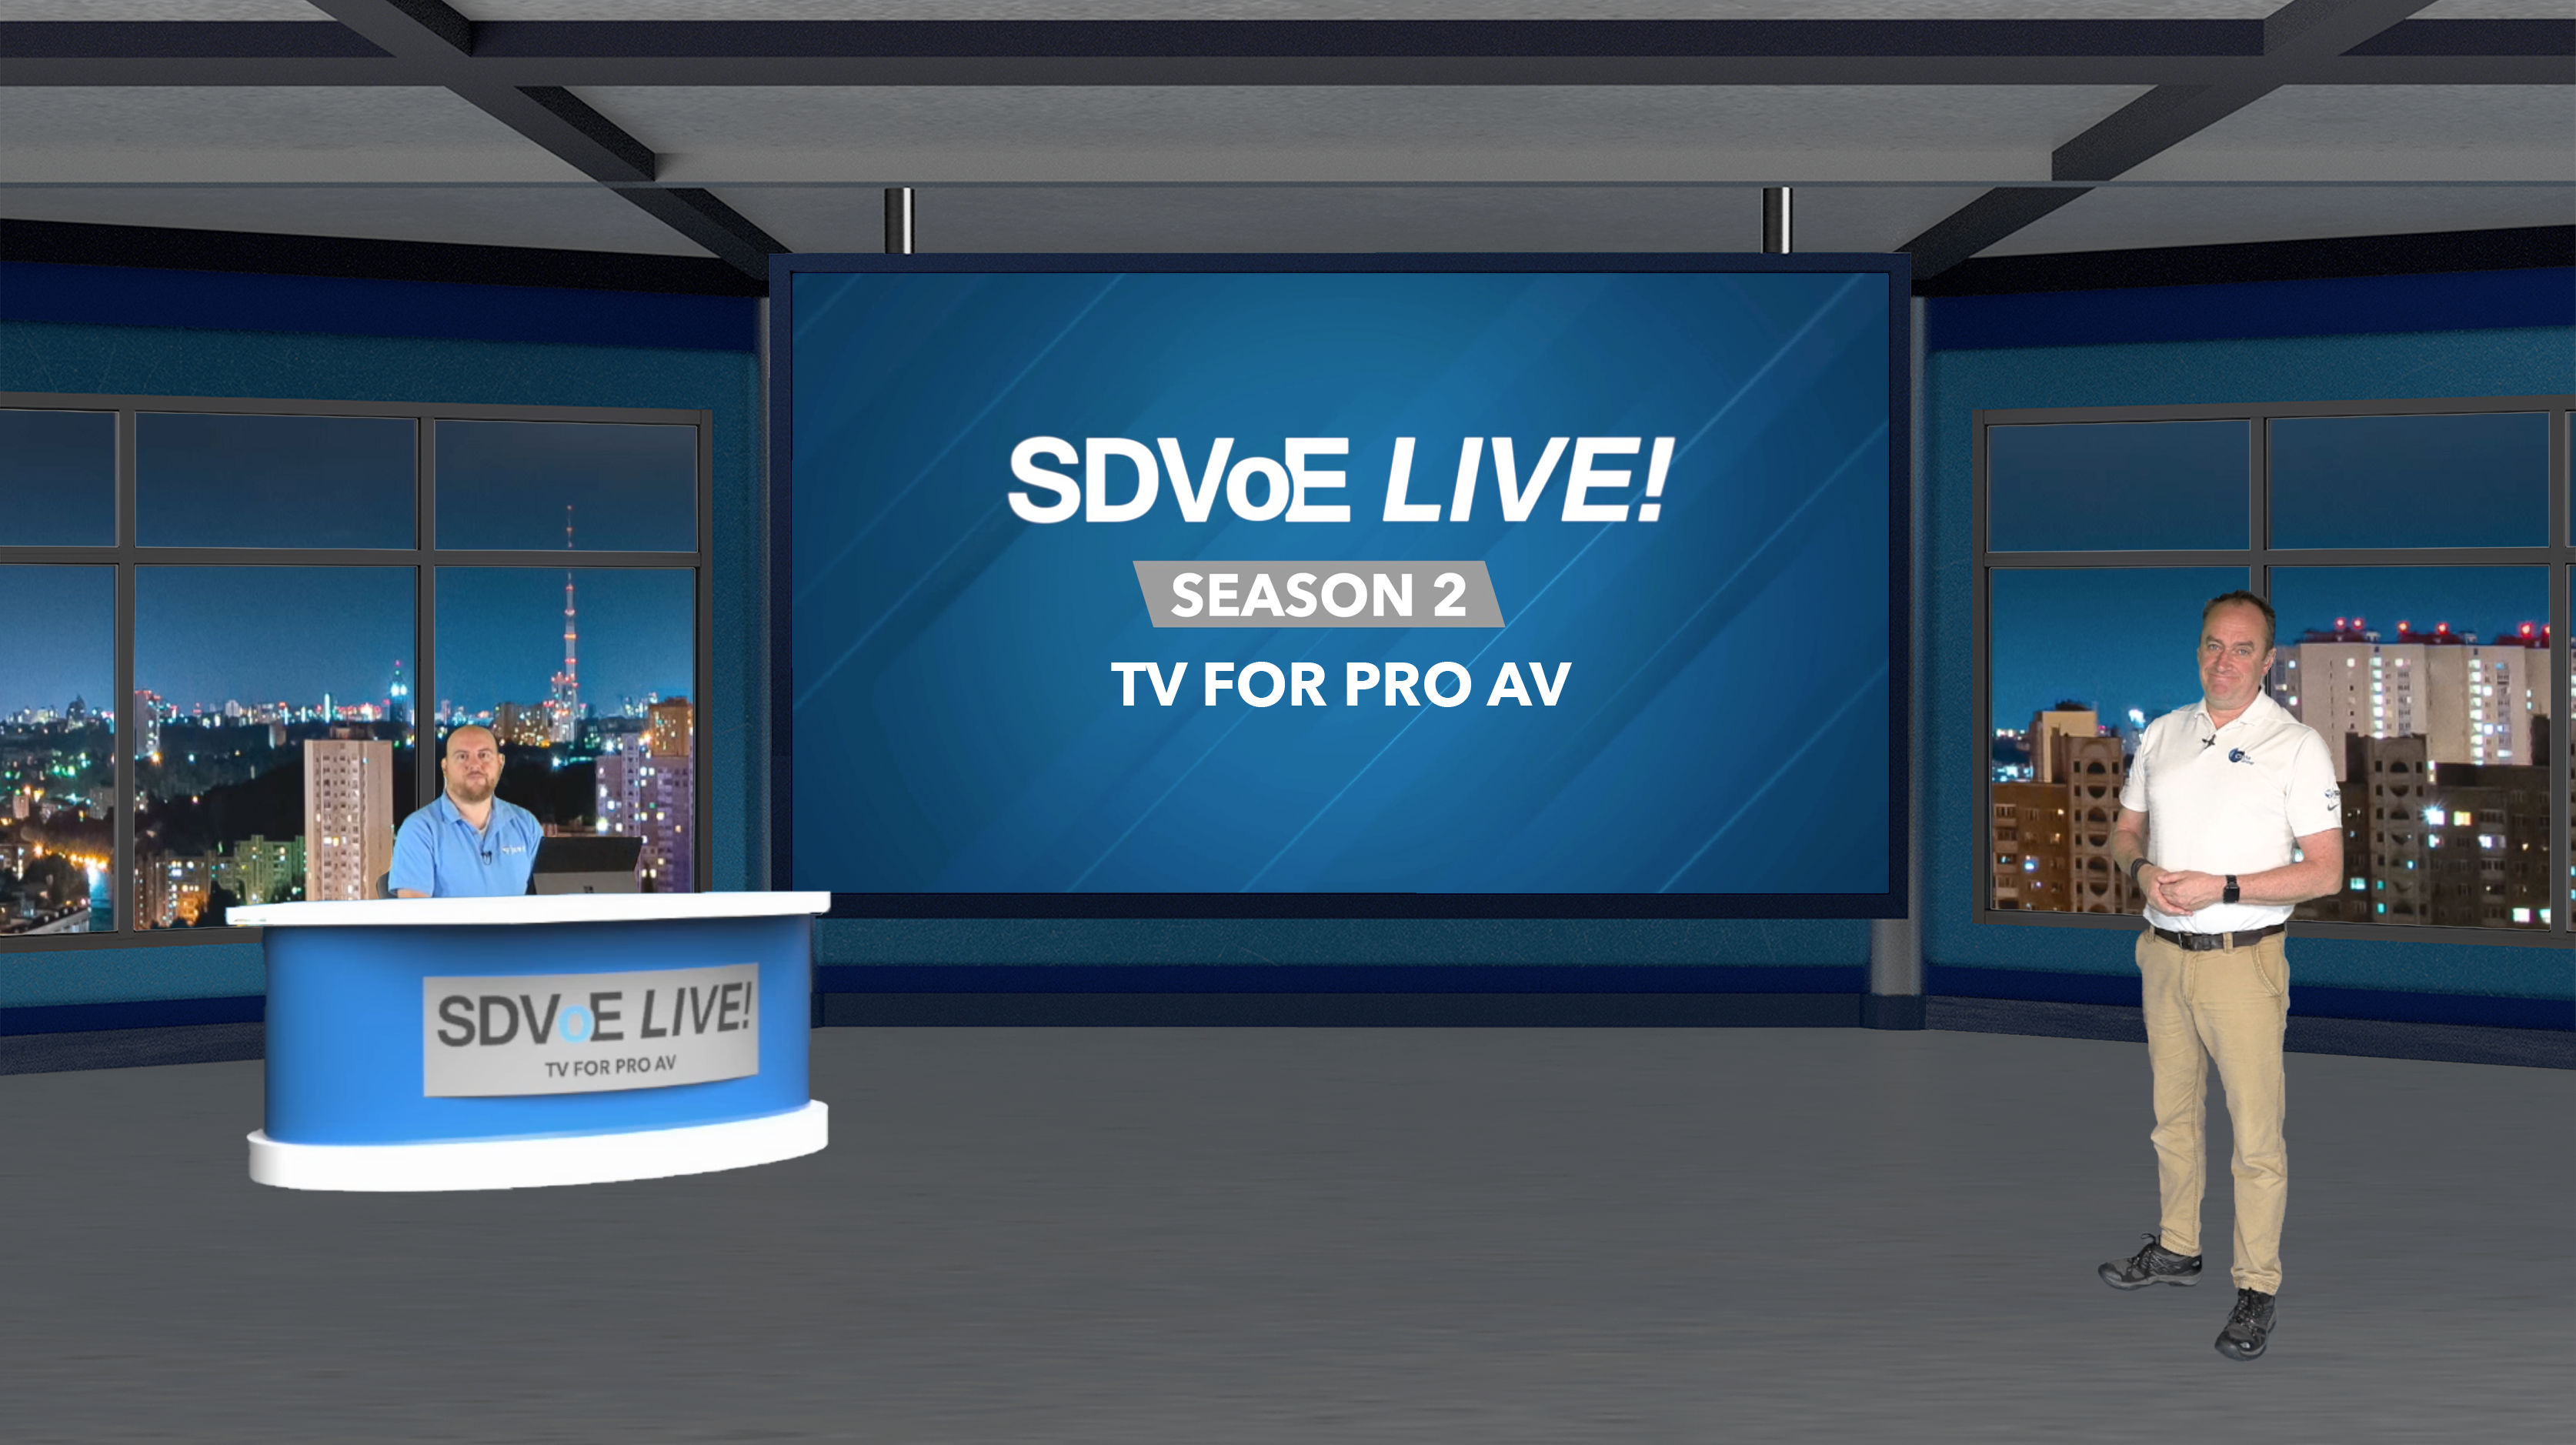 SDVoE LIVE! Season 2 Episode 8: Pro AV Requirements Capture: Are You Asking the Right Questions?